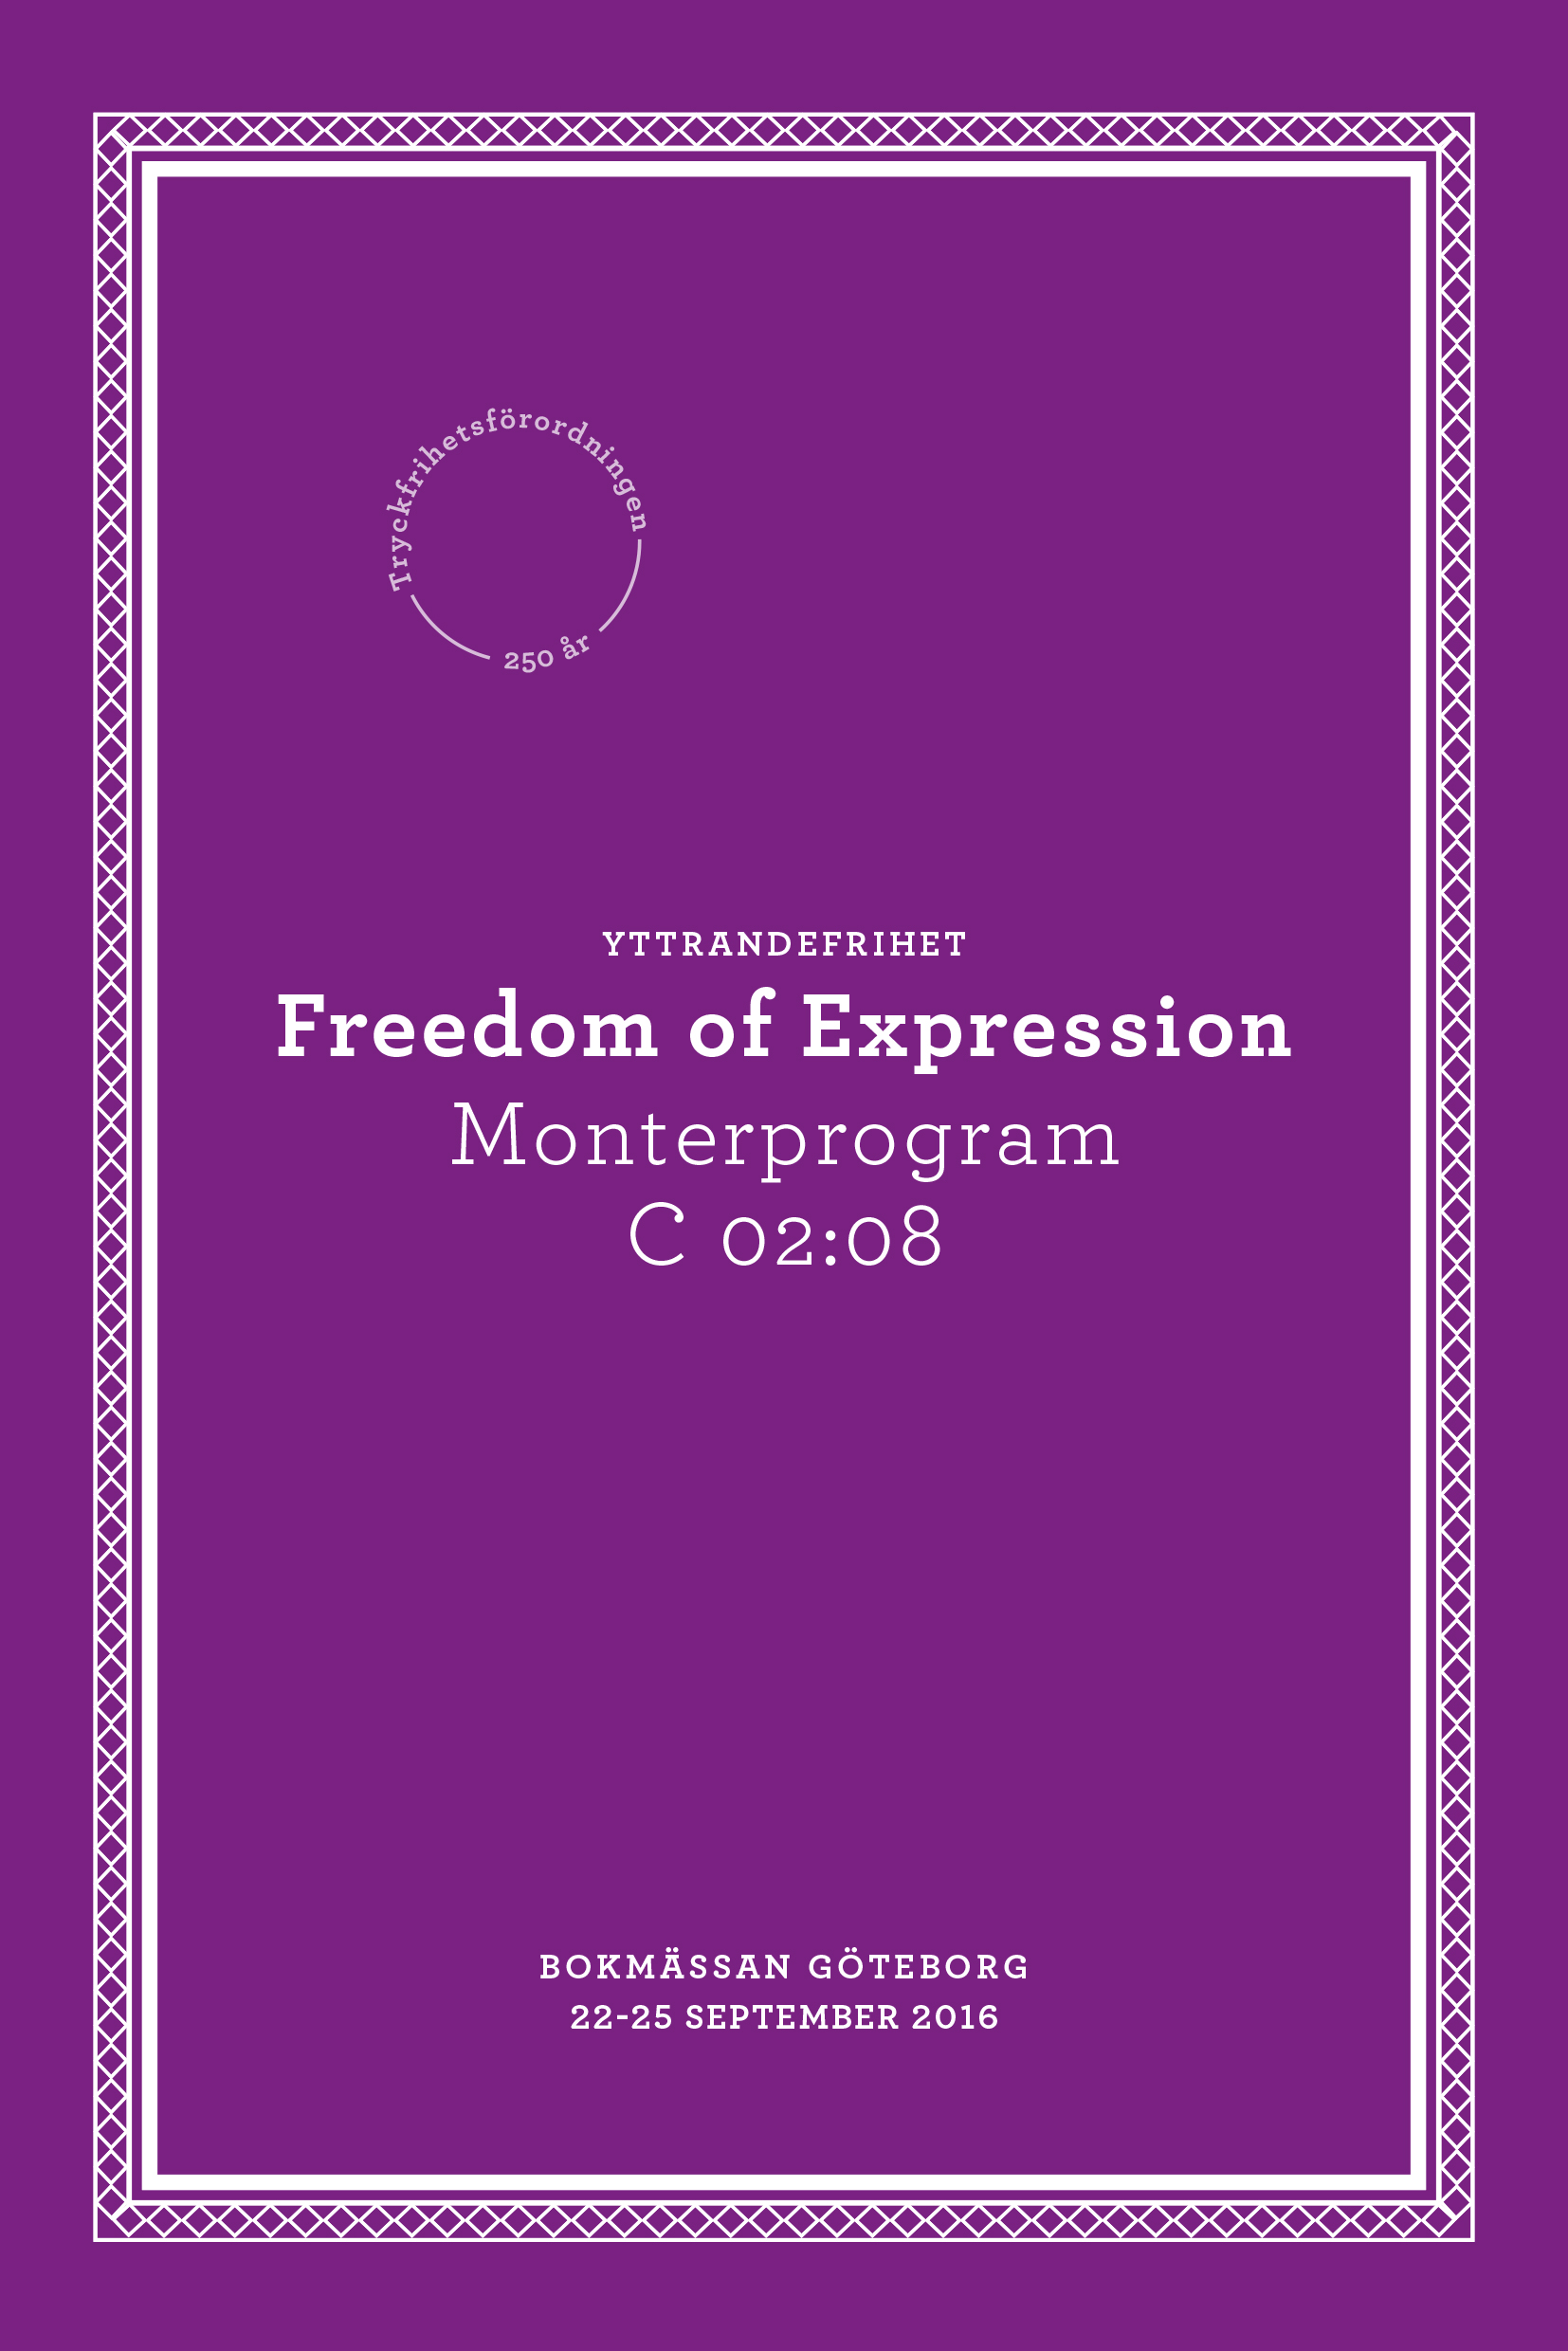 Freedom of Expression stand at Gothenburgh Bookfair 2016 - Programme. Photo.